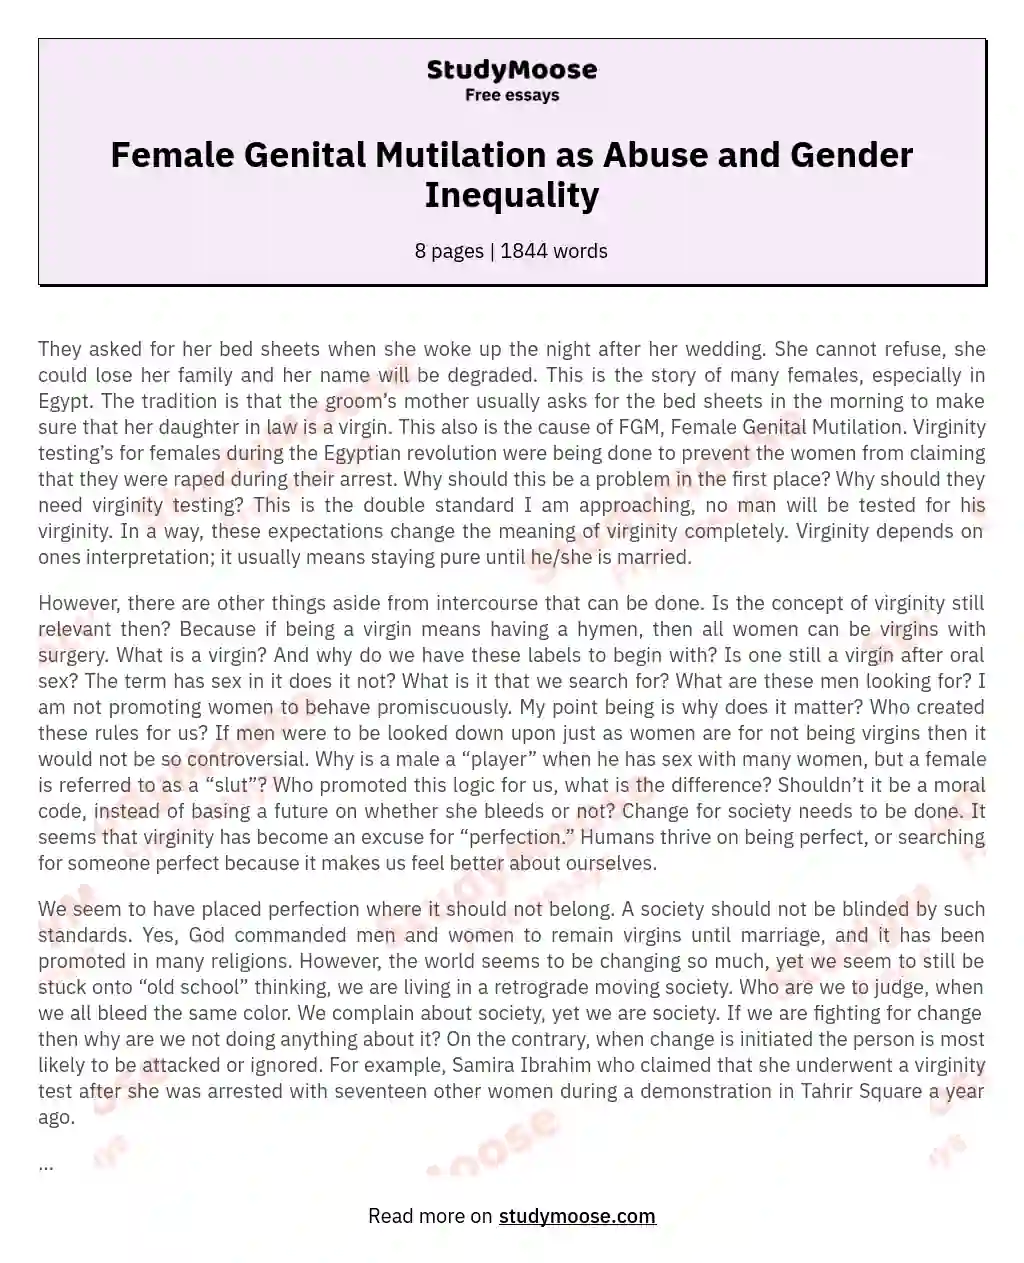 Female Genital Mutilation as Abuse and Gender Inequality